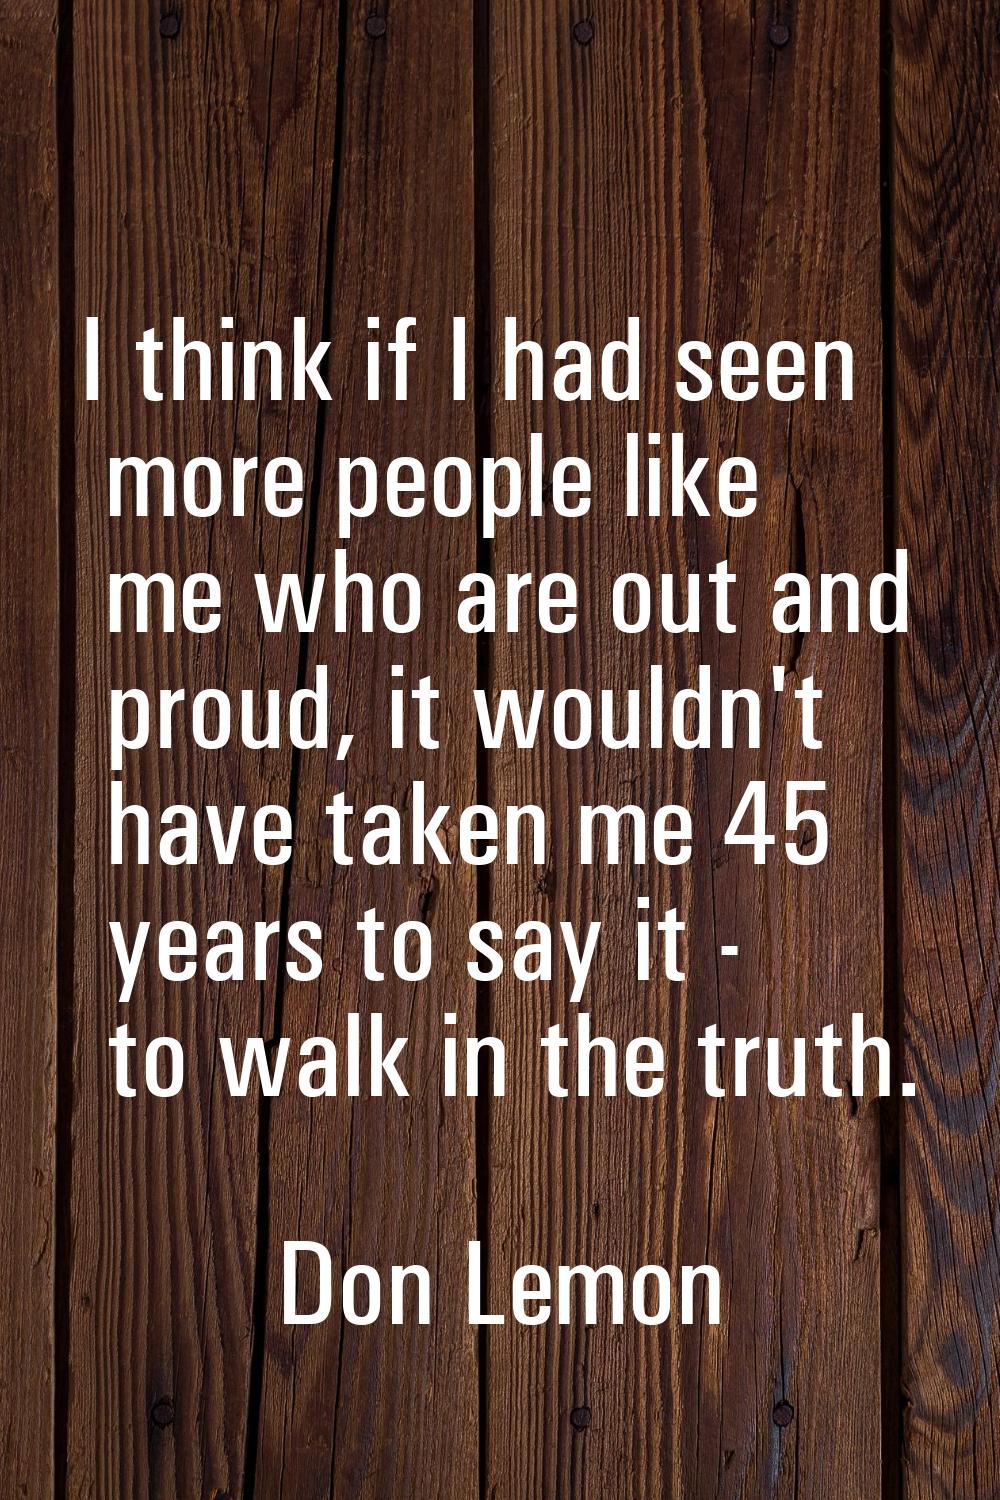 I think if I had seen more people like me who are out and proud, it wouldn't have taken me 45 years